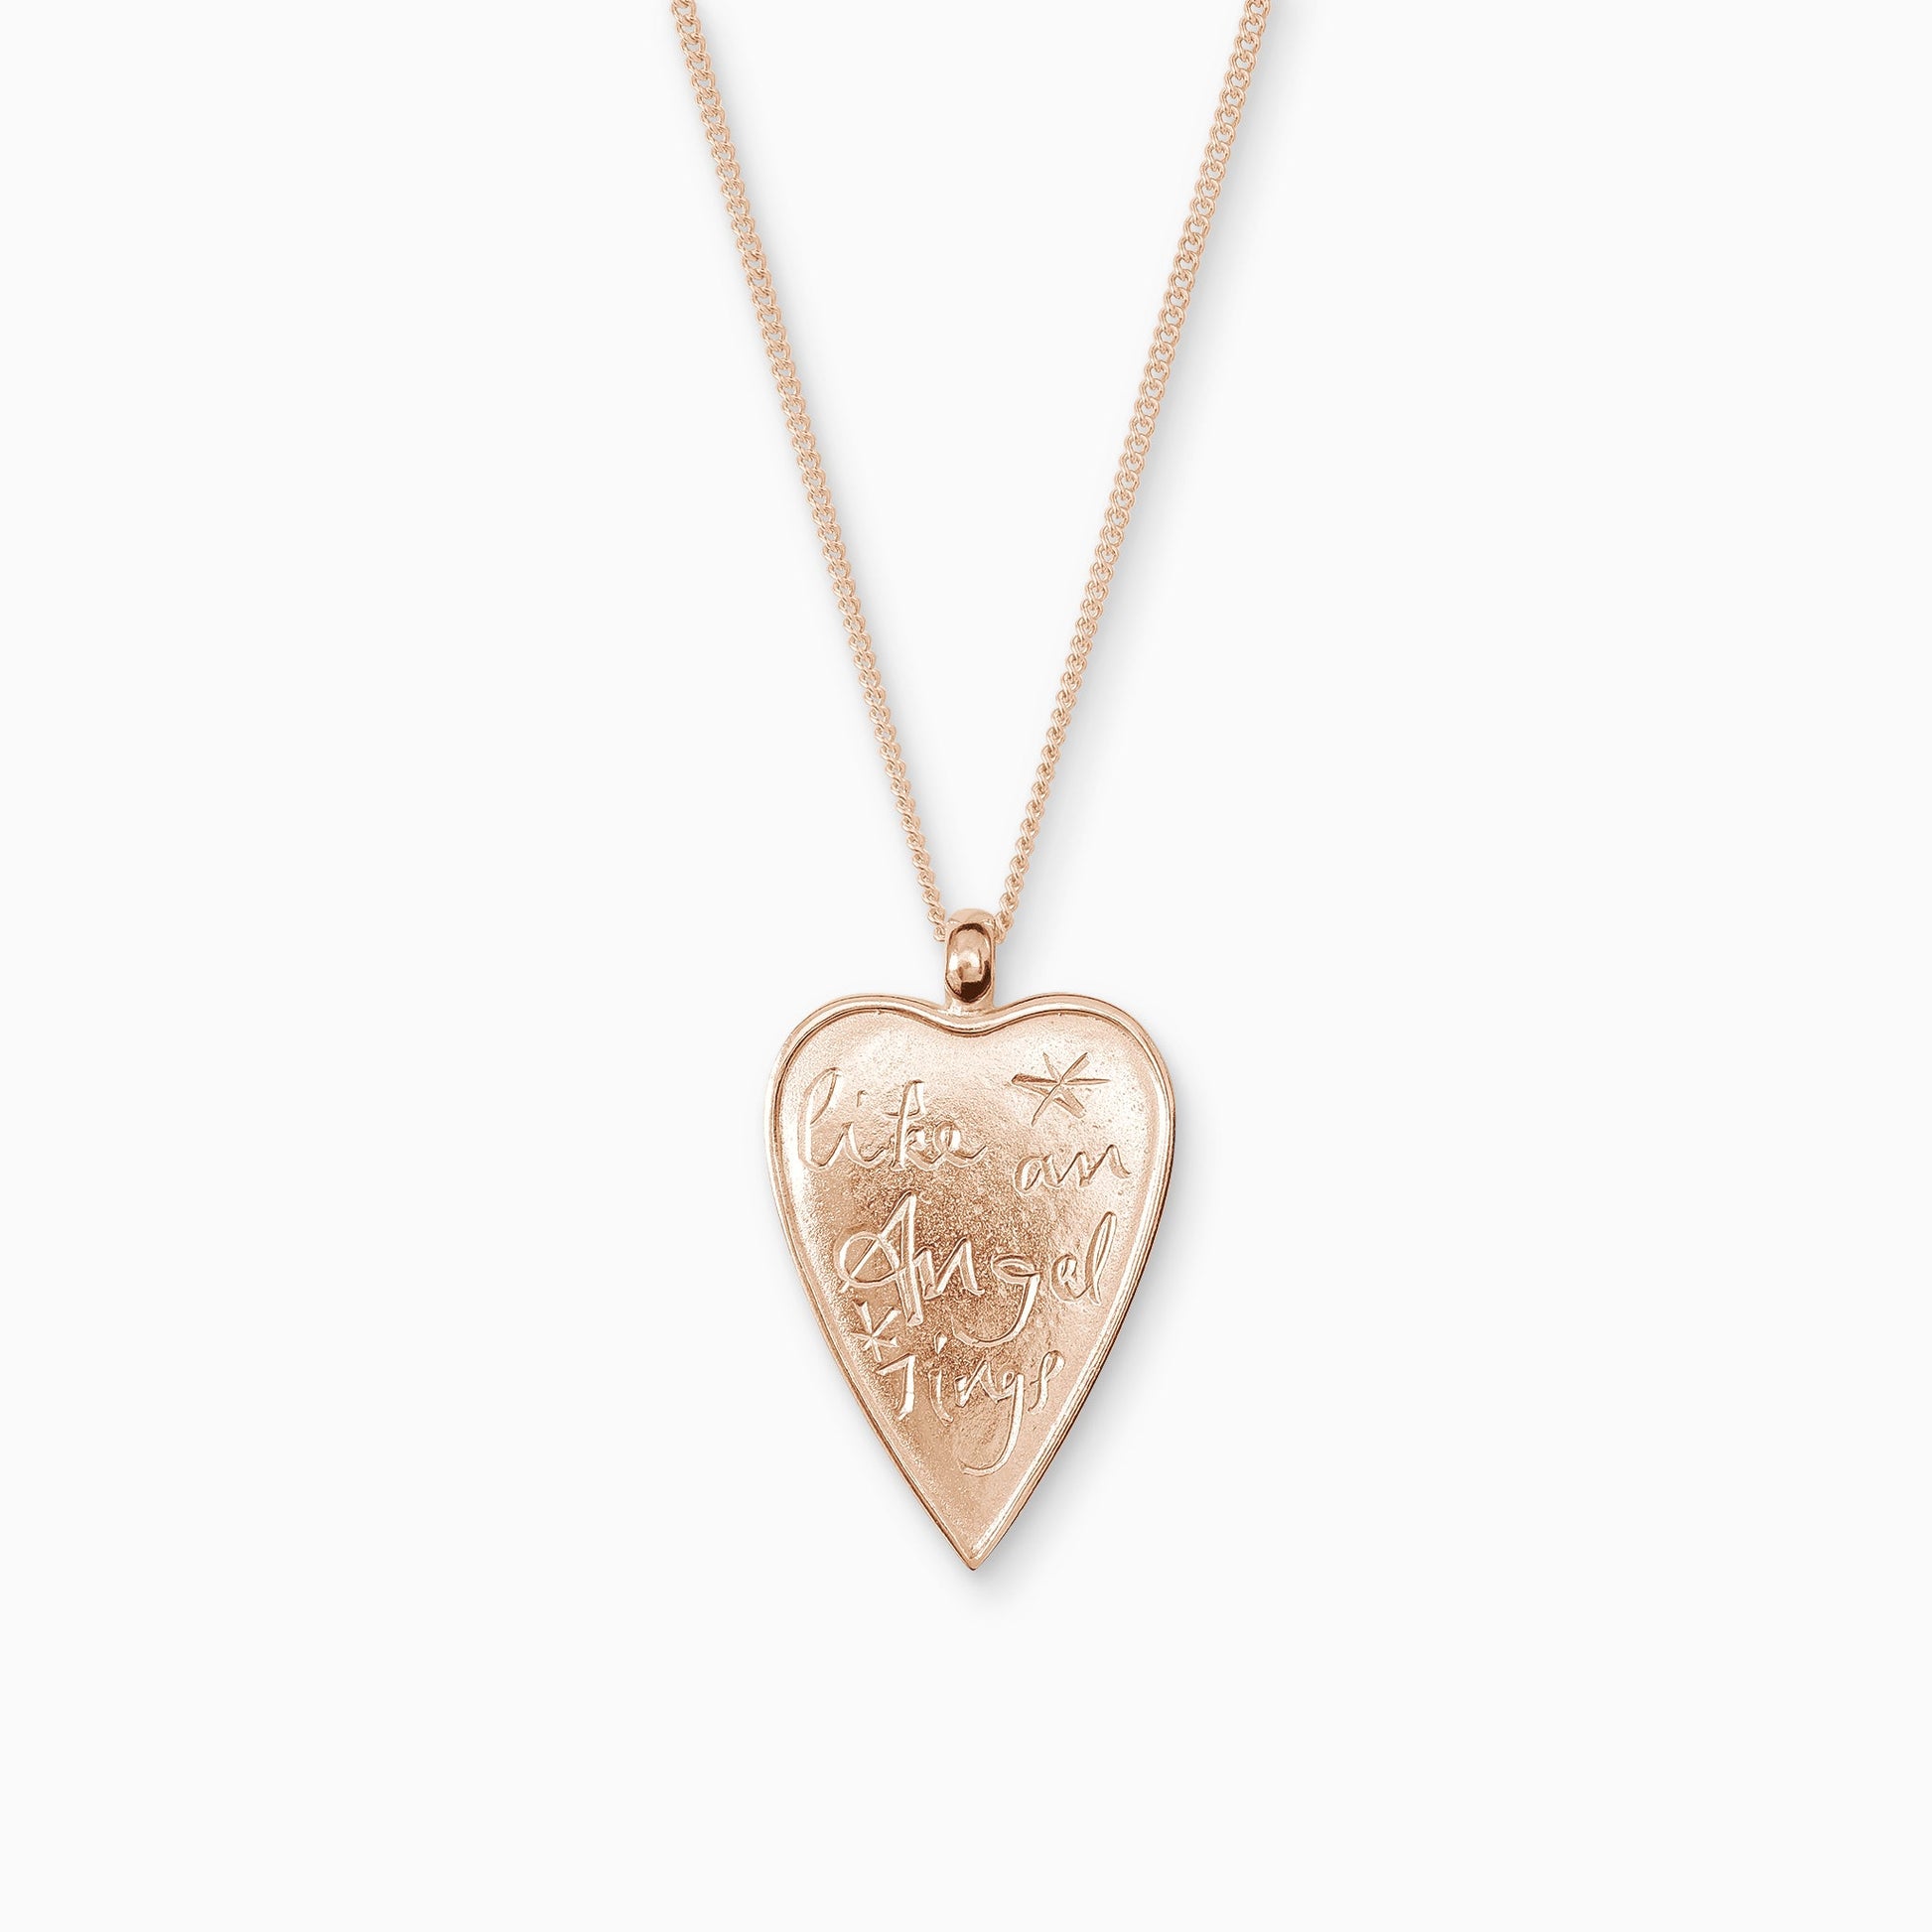 18ct Fairtrade rose gold teardrop shaped charm, 38cm x 24mm on a 45cm fine curb chain.  Like an Angel Sings is inscribed in a handwritten script on the front of the pendant.